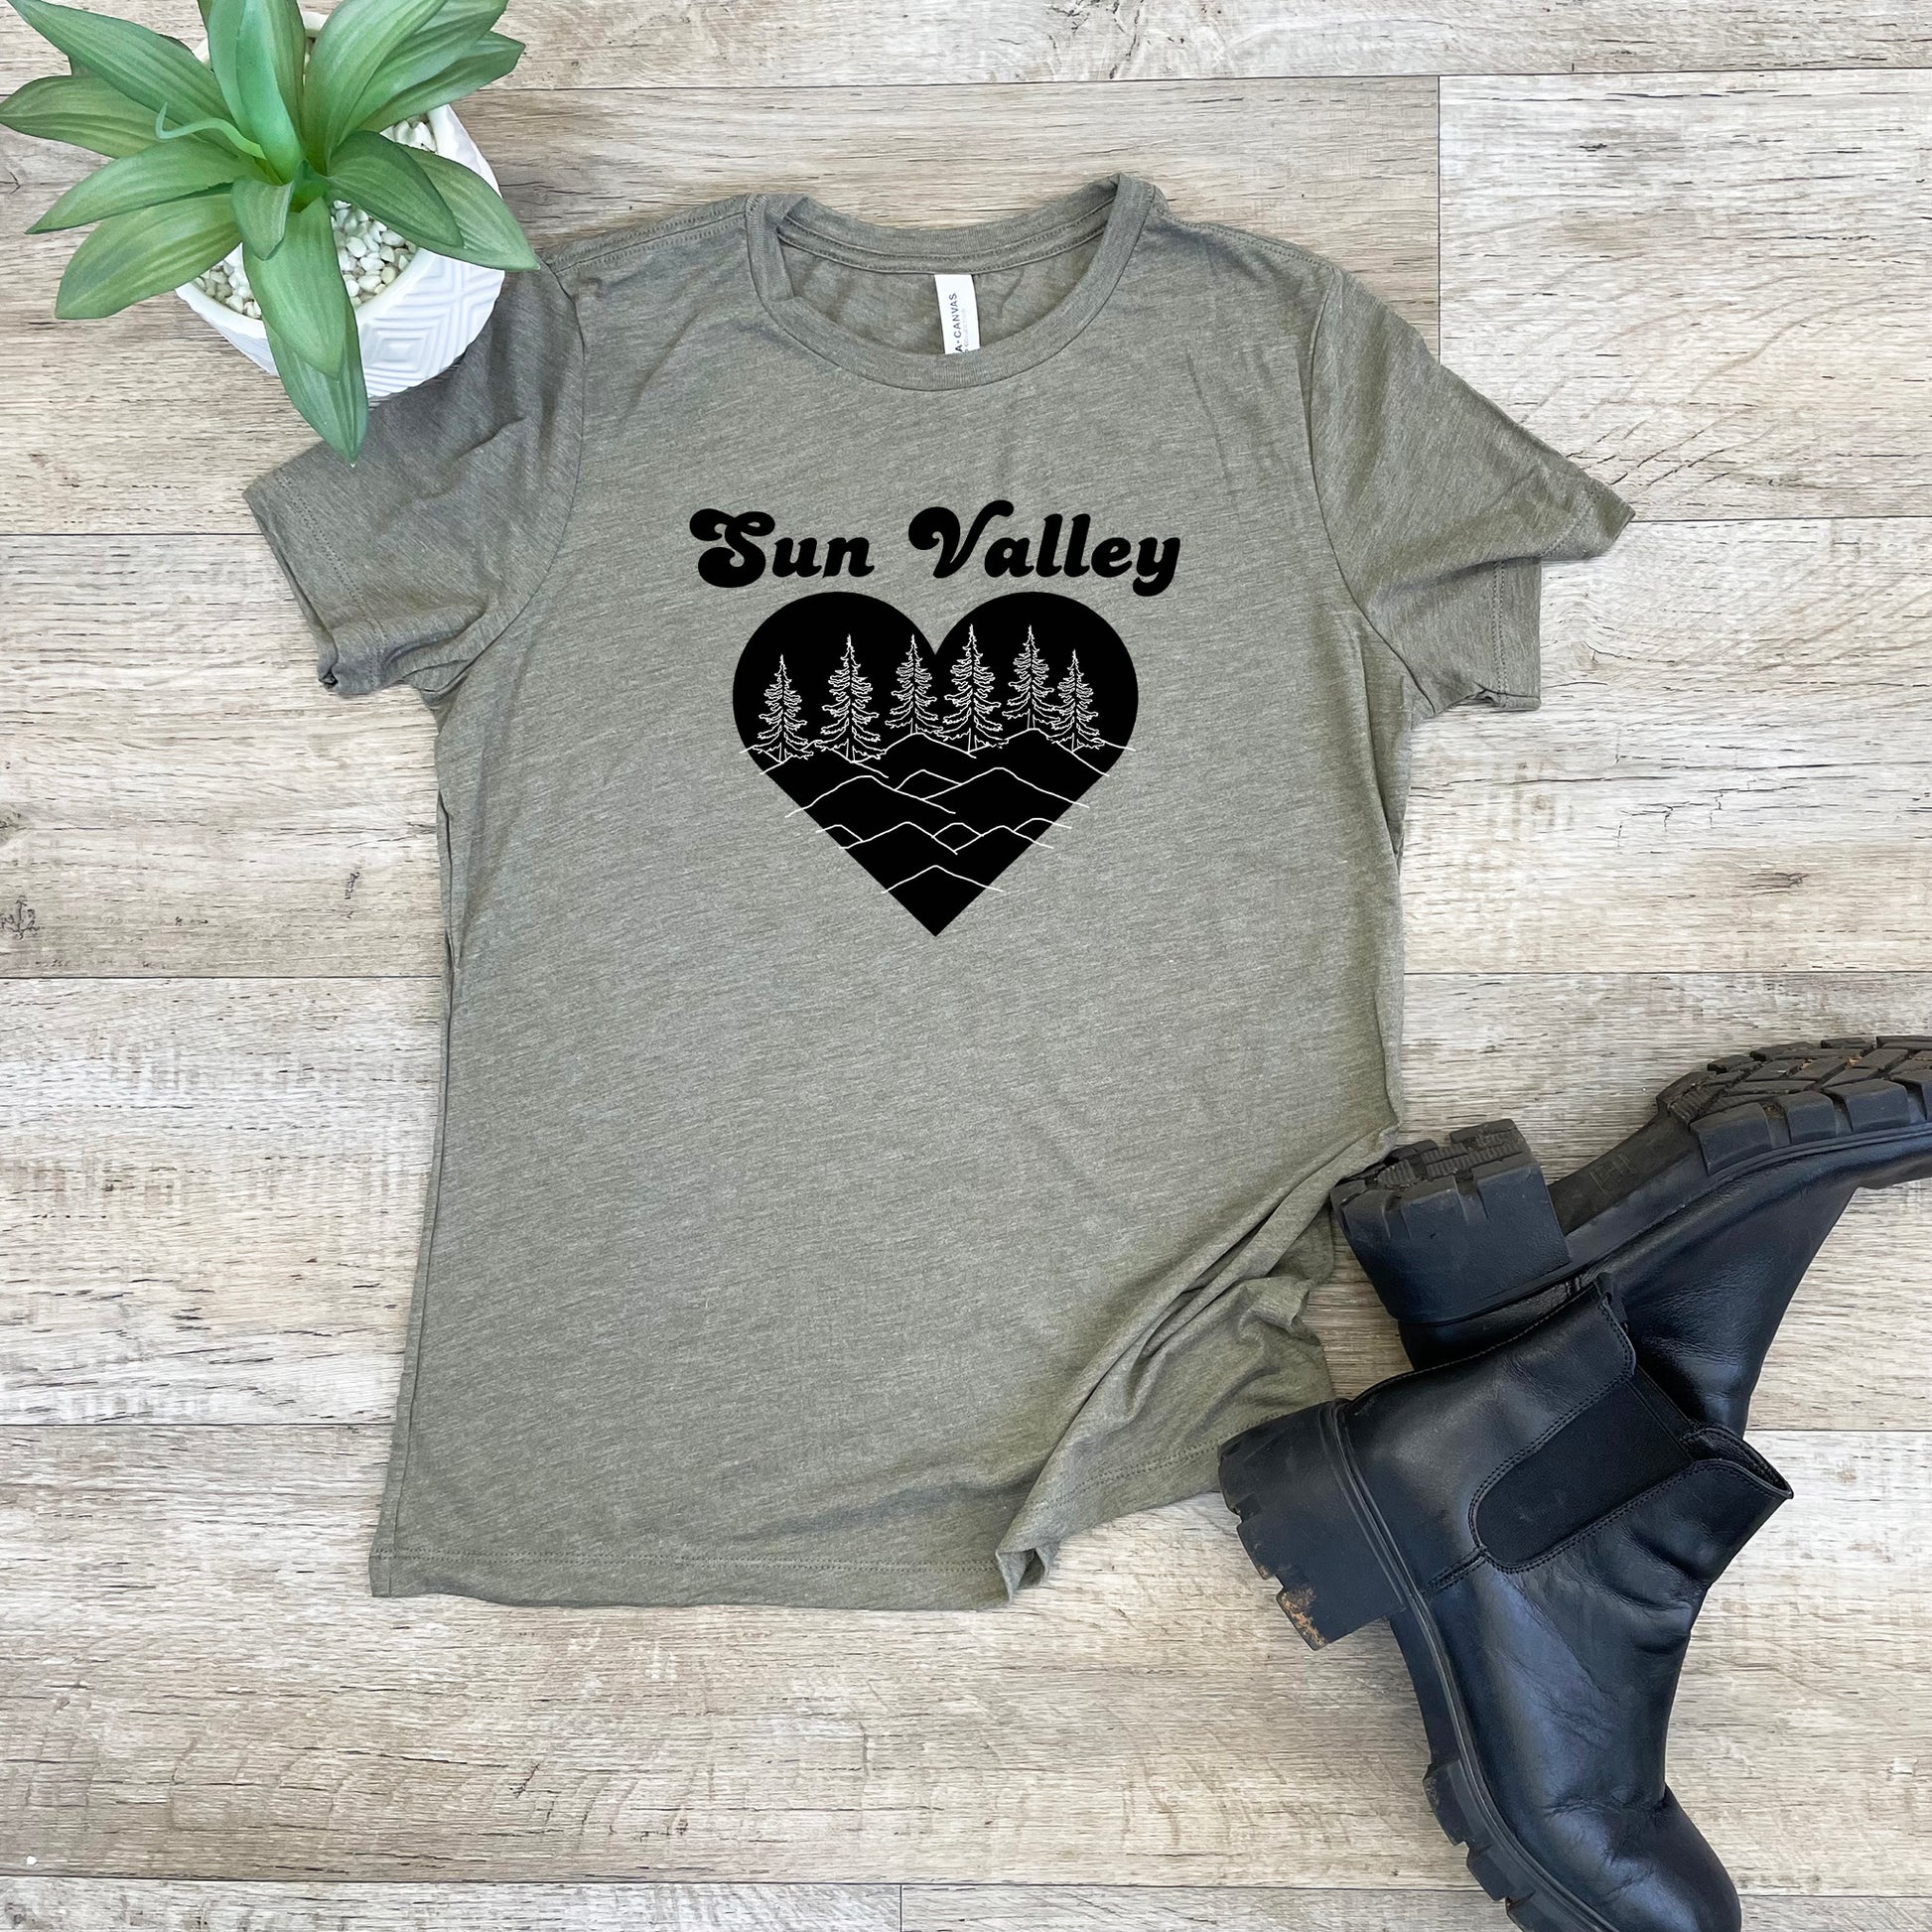 a t - shirt that says sun valley with trees in the heart